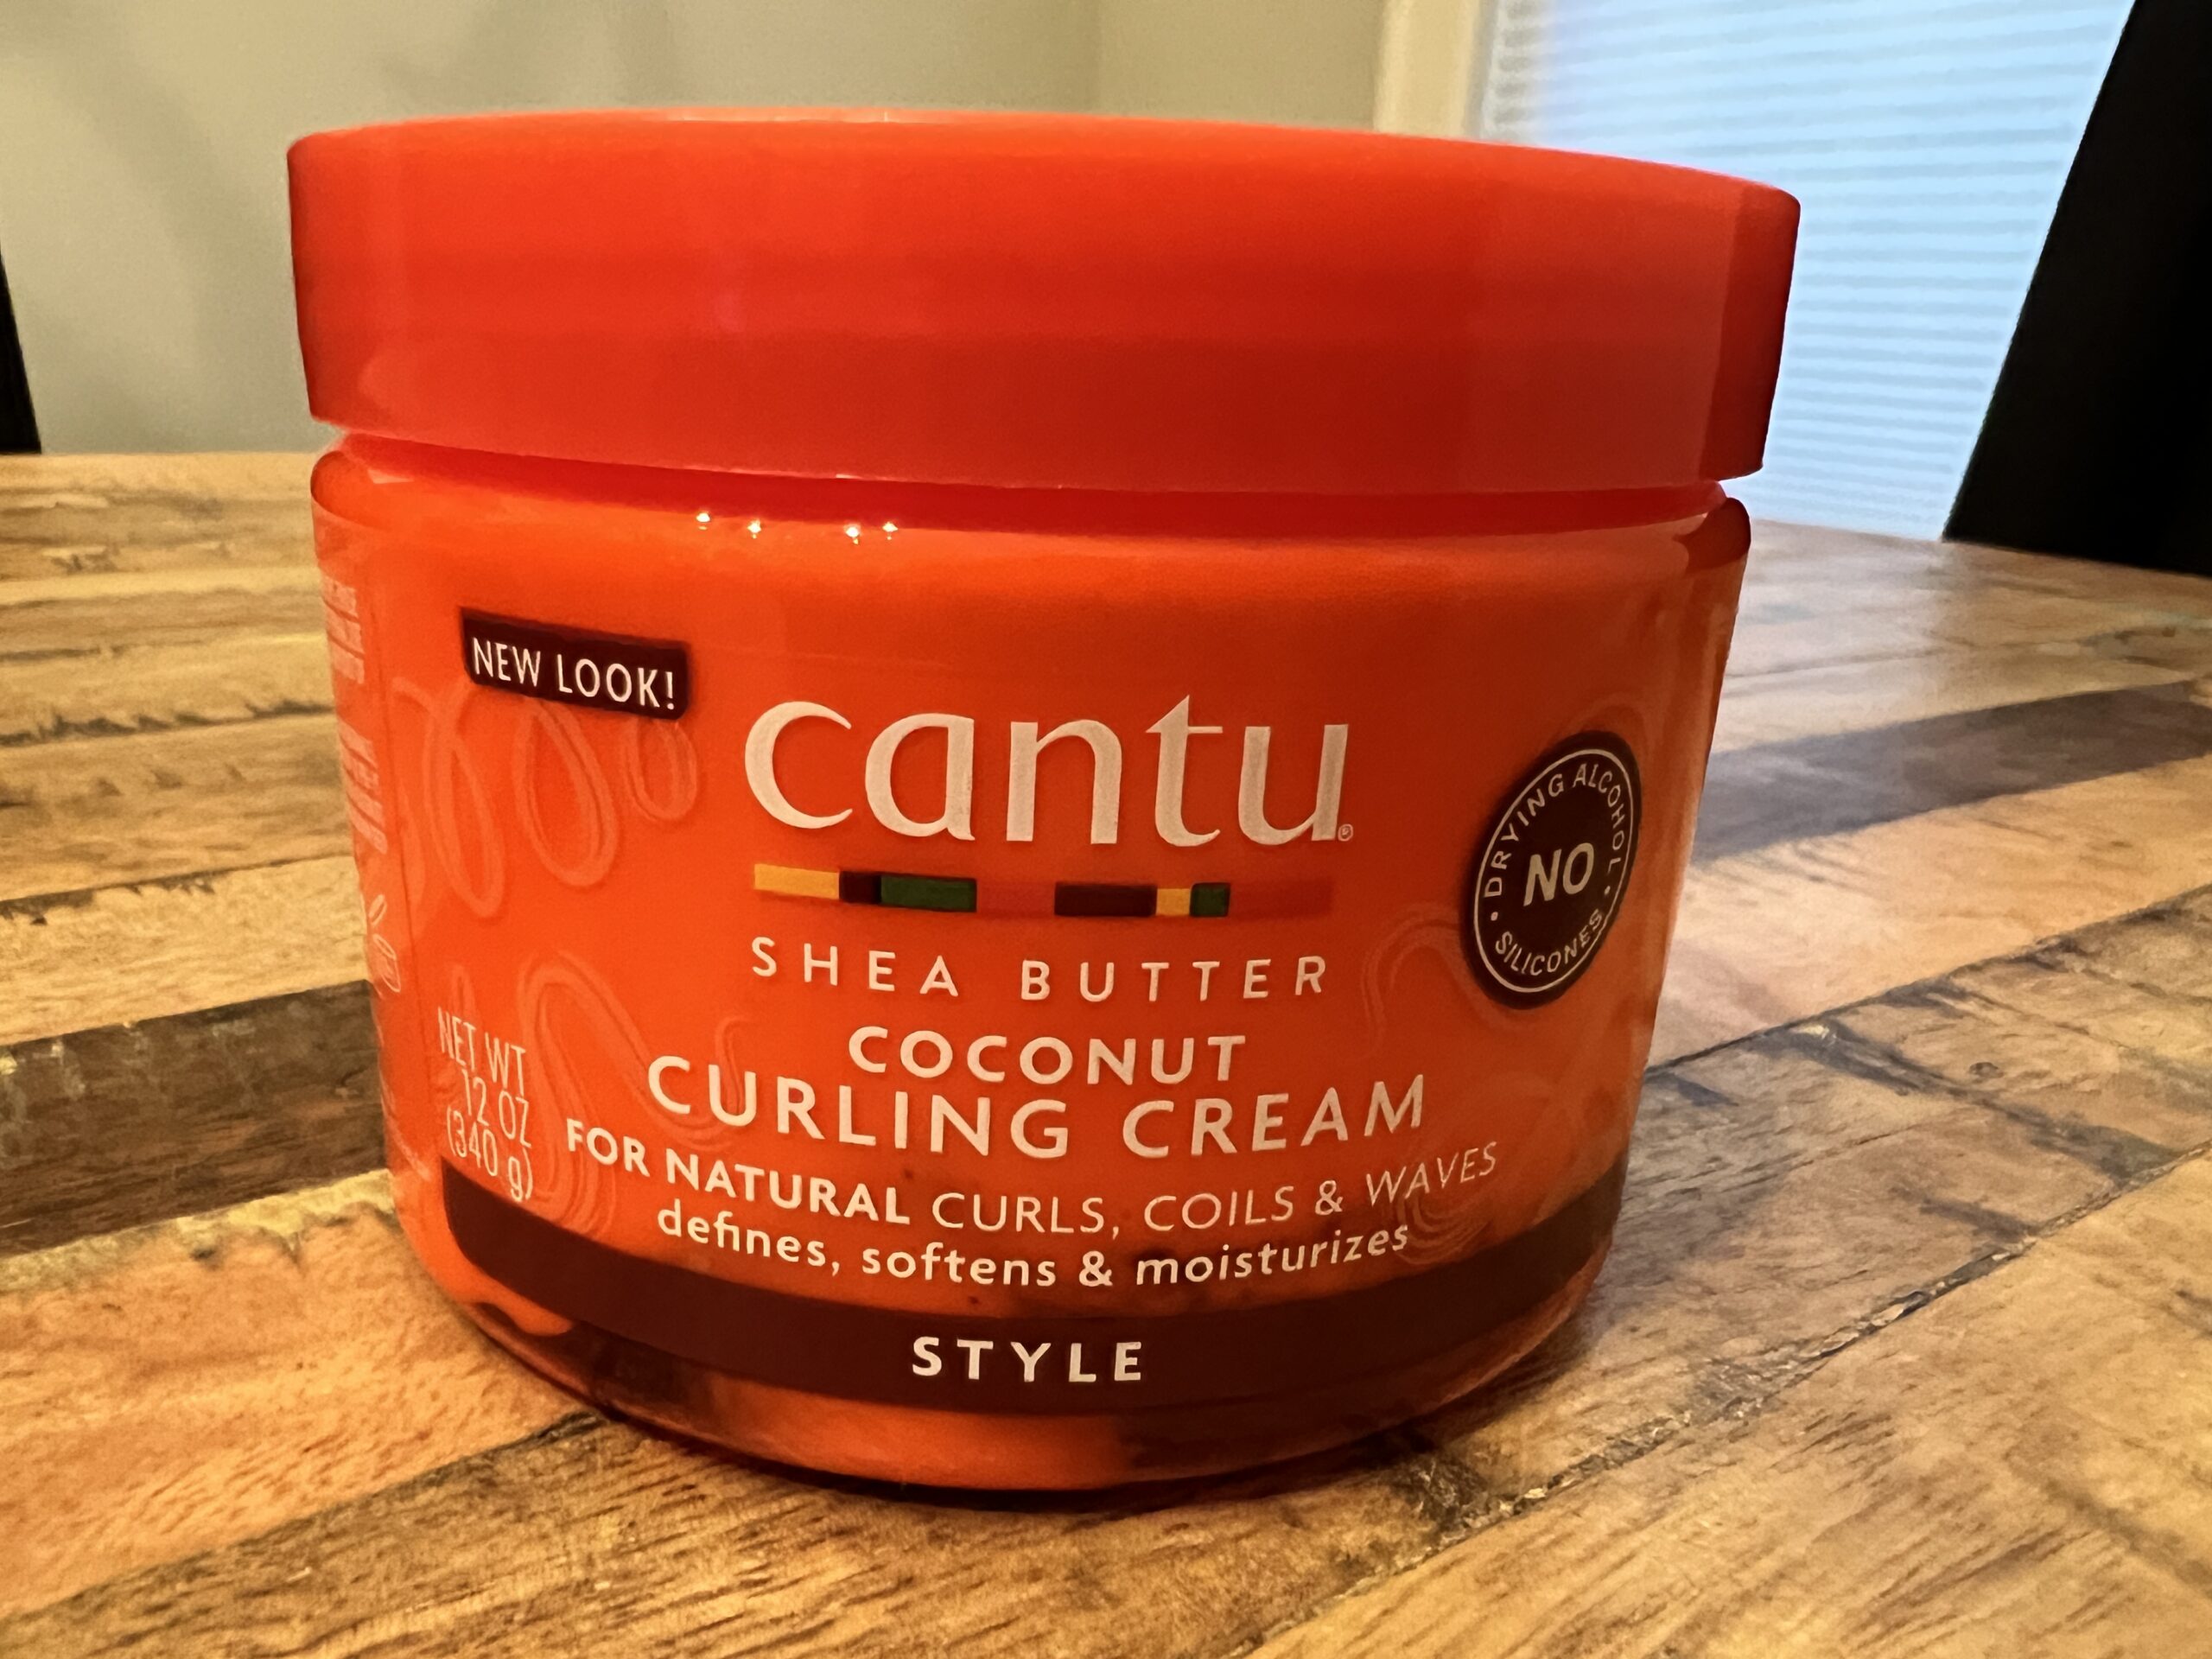 Cantu Shea Butter Coconut Curling Cream container, ideal for moisturizing natural hair textures.